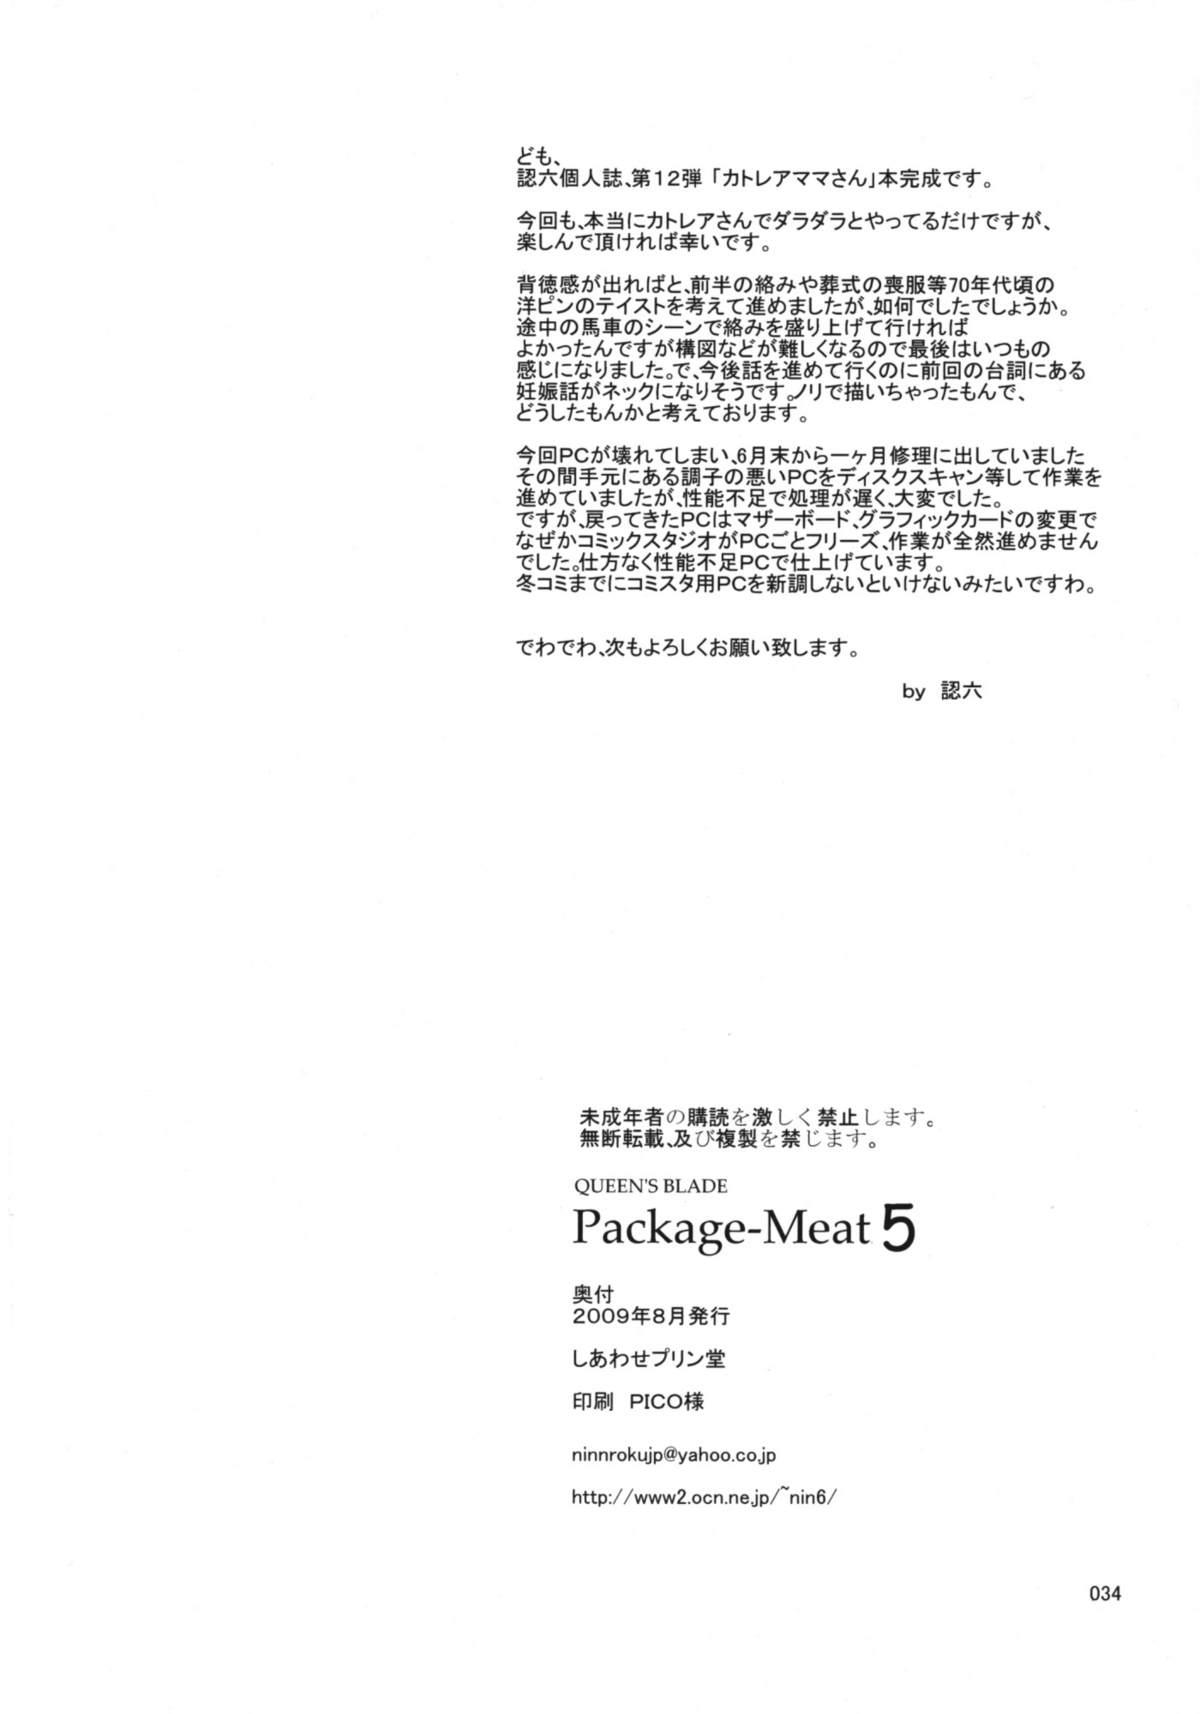 Package-Meat 5 32